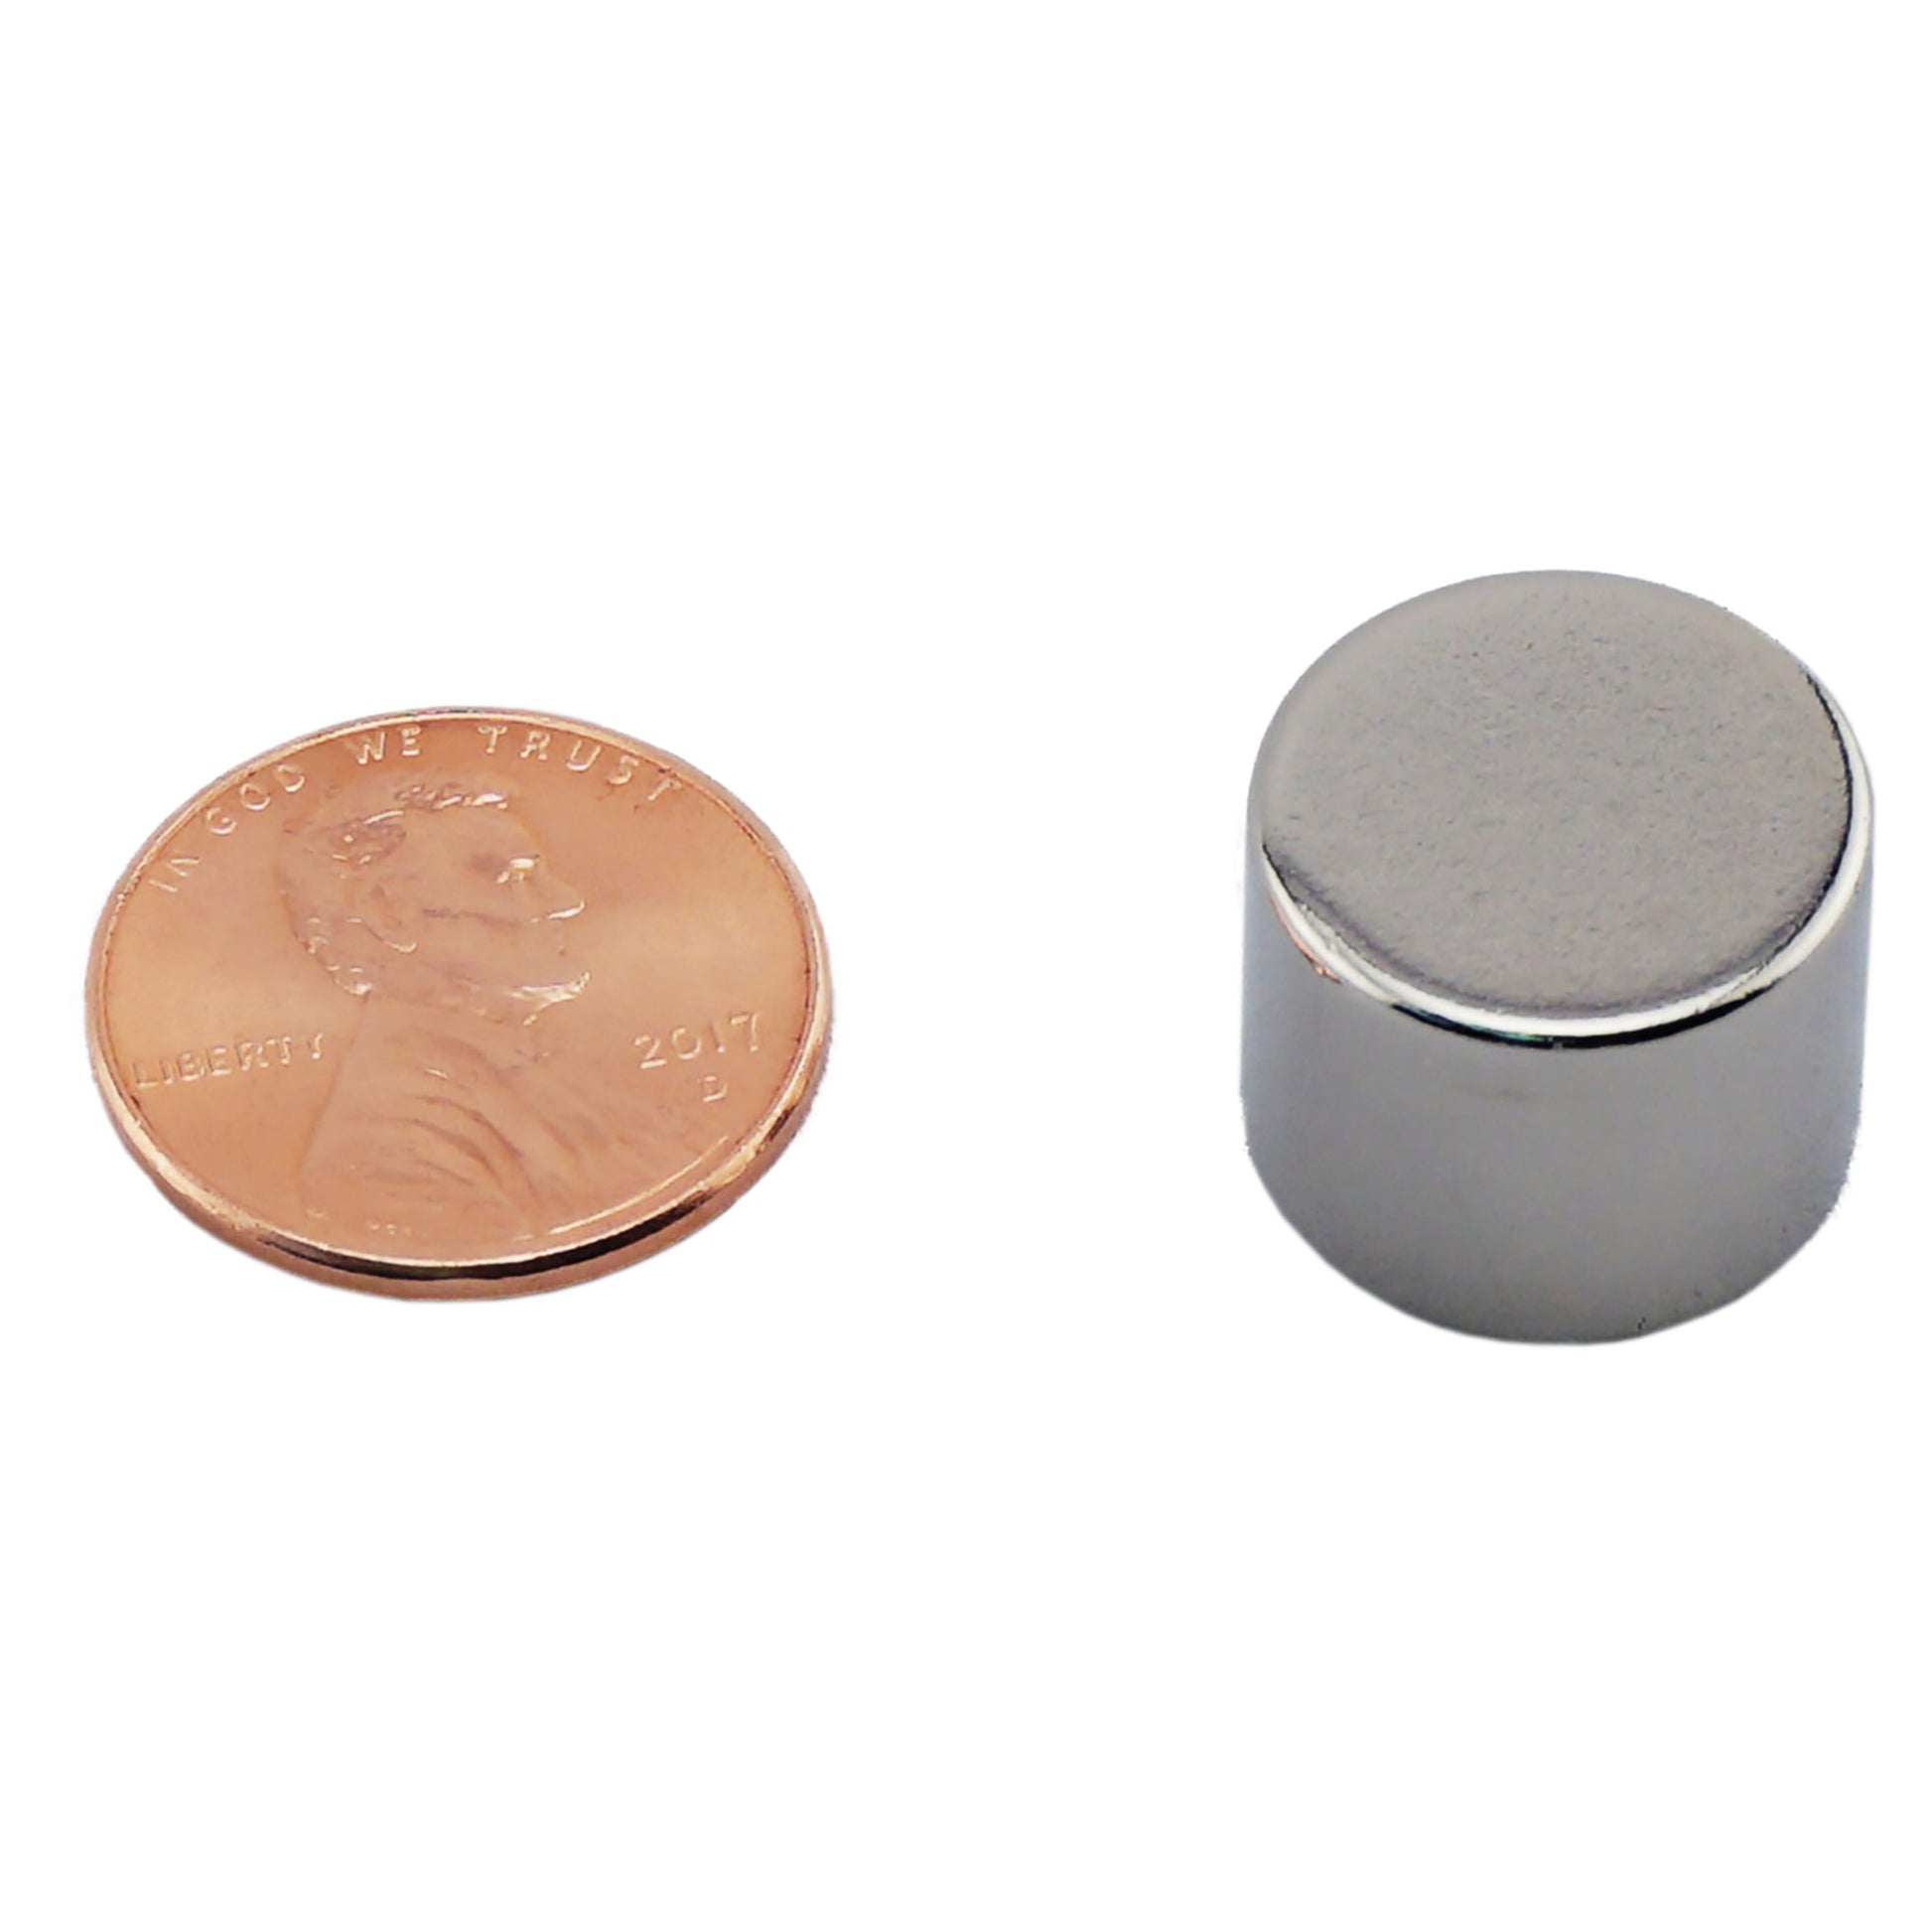 Load image into Gallery viewer, ND006214N Neodymium Disc Magnet - Compared to Penny for Size Reference